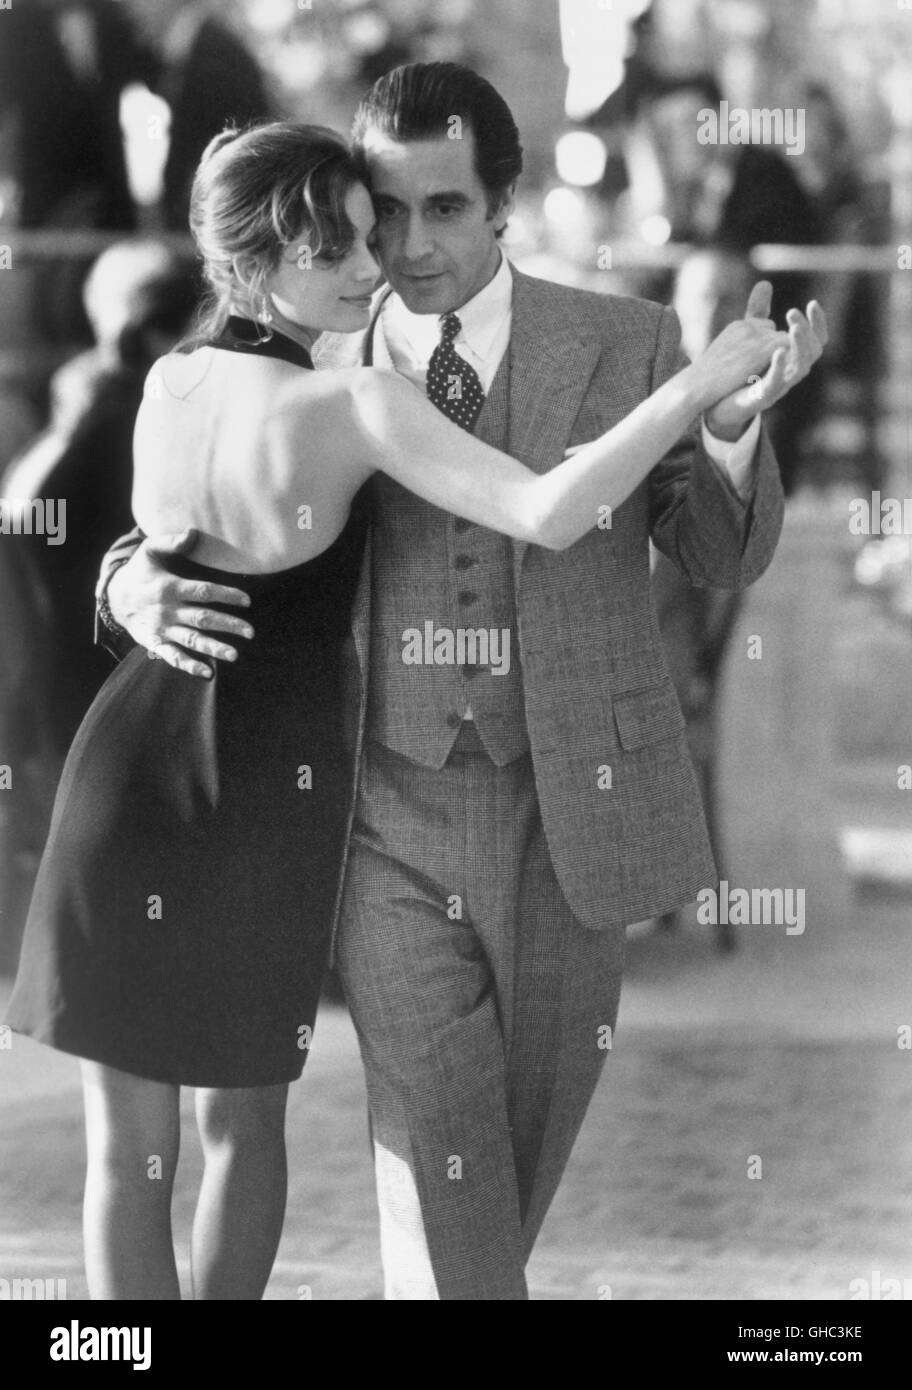 Gabrielle anwar scent of a woman Black and White Stock Photos & Images -  Alamy